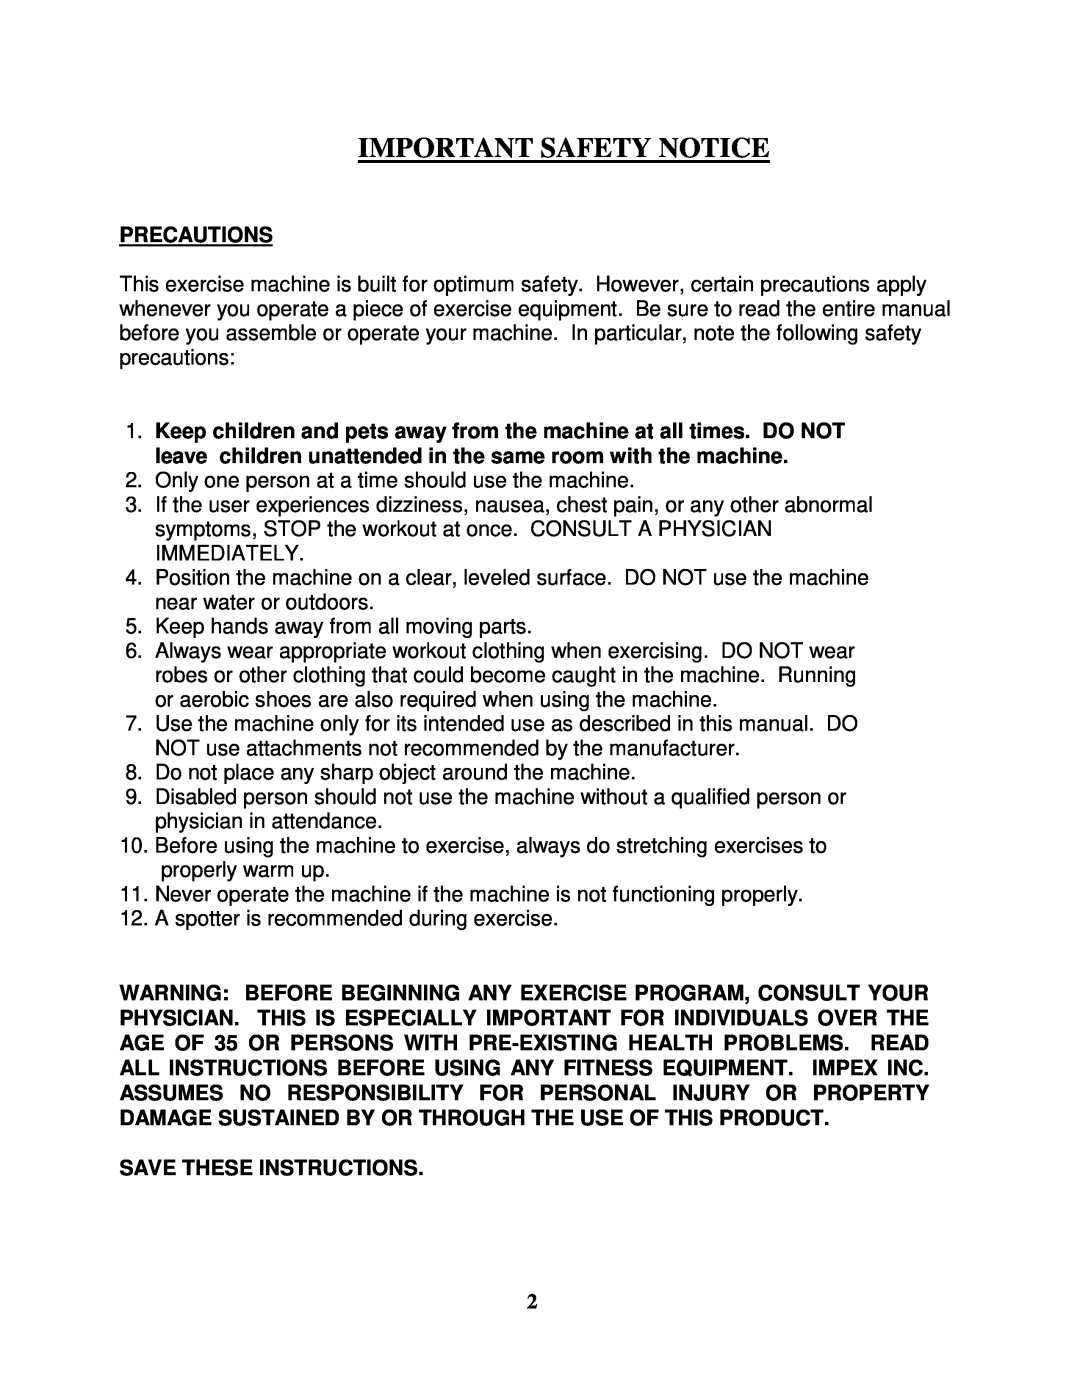 Impex WM-1501 manual Important Safety Notice, Precautions, Save These Instructions 